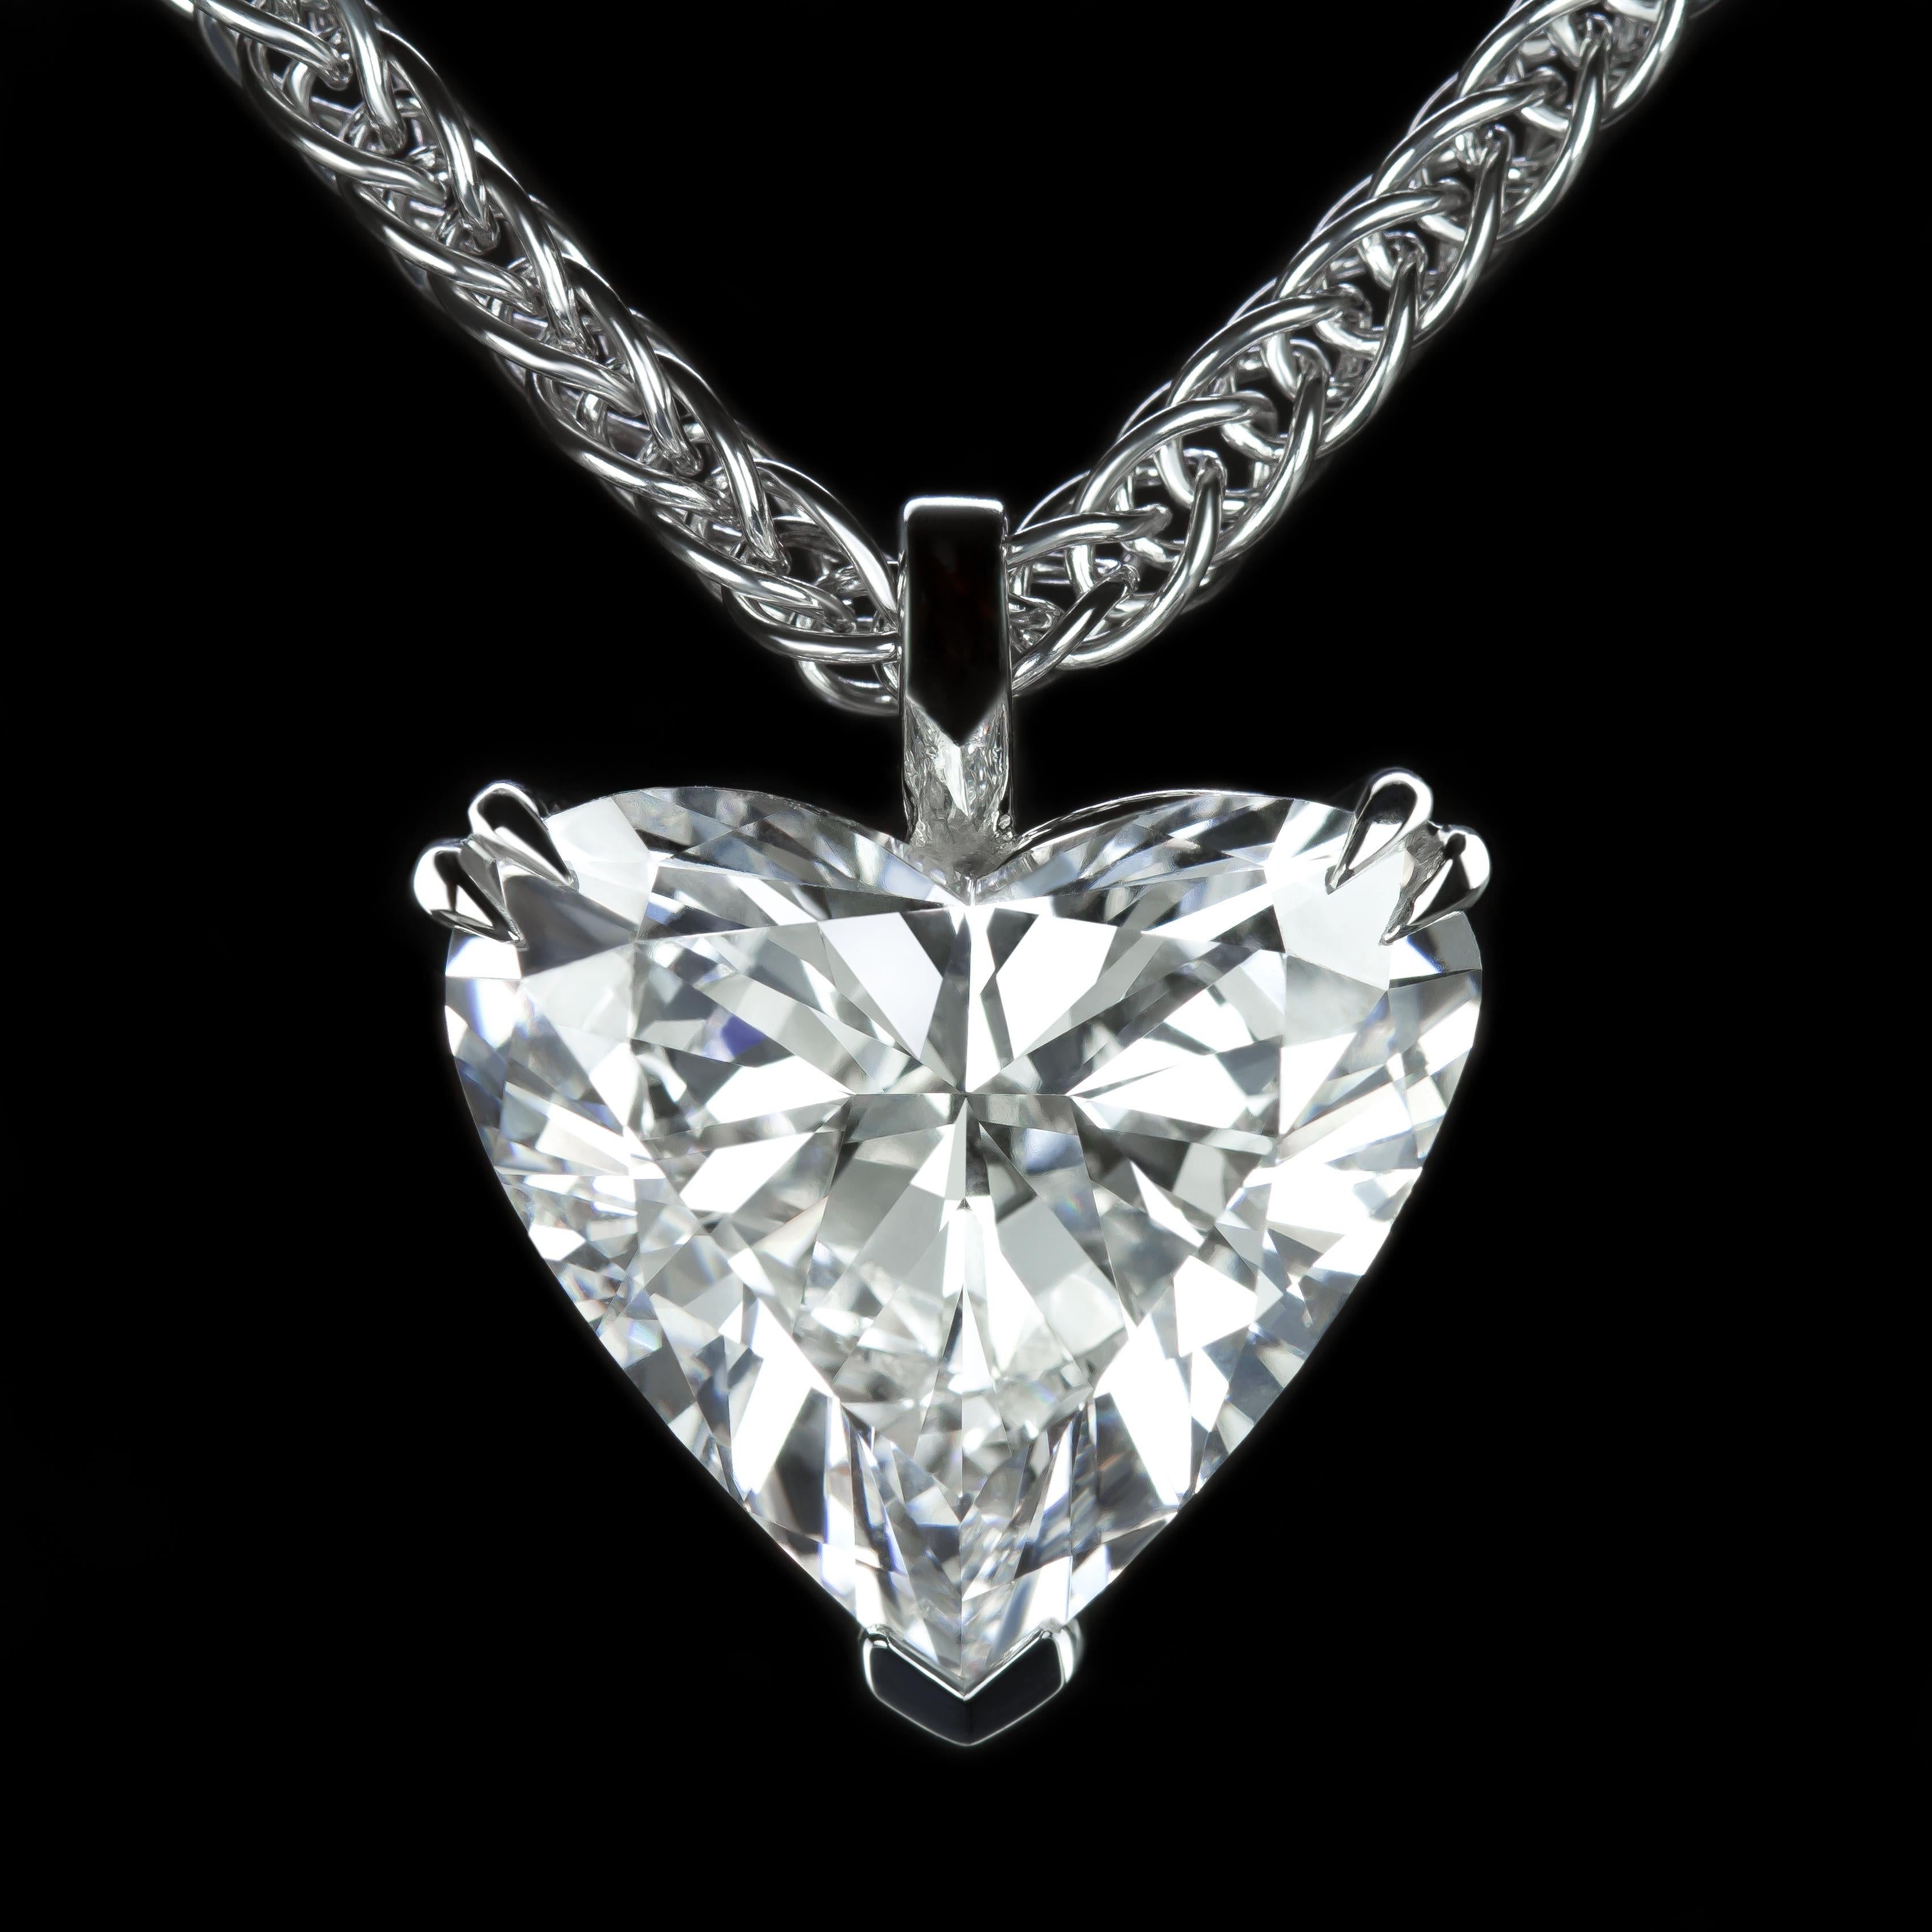 This amazing heart diamond necklace features a large heart shaped diamond weighs 10 carat. 

The diamond is bright white, completely clean, and vibrant with bold sparkle! The 18k White gold setting is classic with a sleek, minimalist design. 